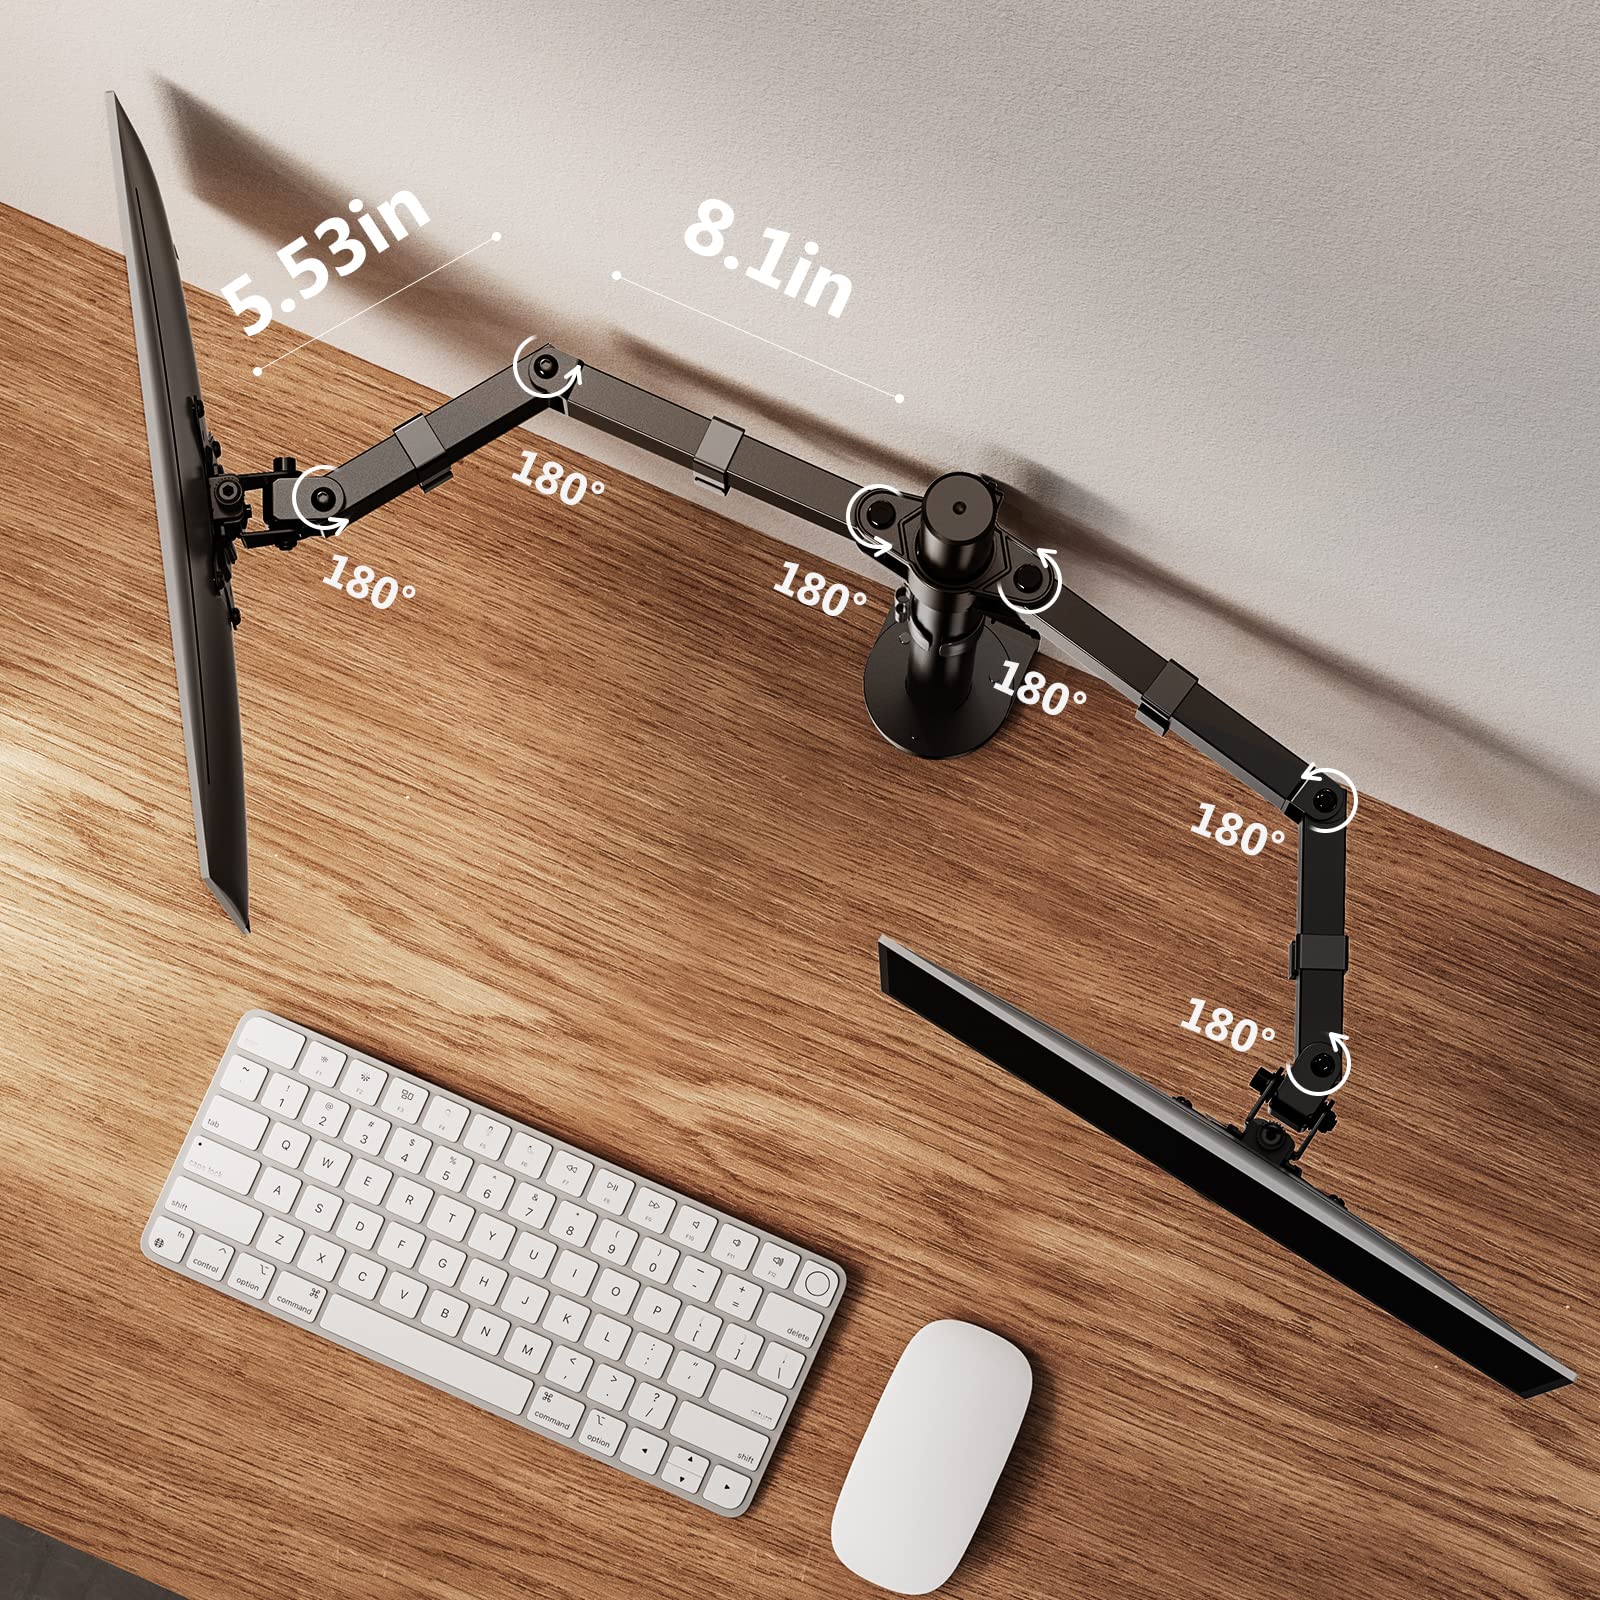 ErGear Dual Monitor Desk Mount, Fully Adjustable Dual Monitor Arm for 2 Computer Screens up to 32 inch, Heavy Duty Dual Monitor Stand for Desk, Holds up to 22 lbs per Arm, EGCM1